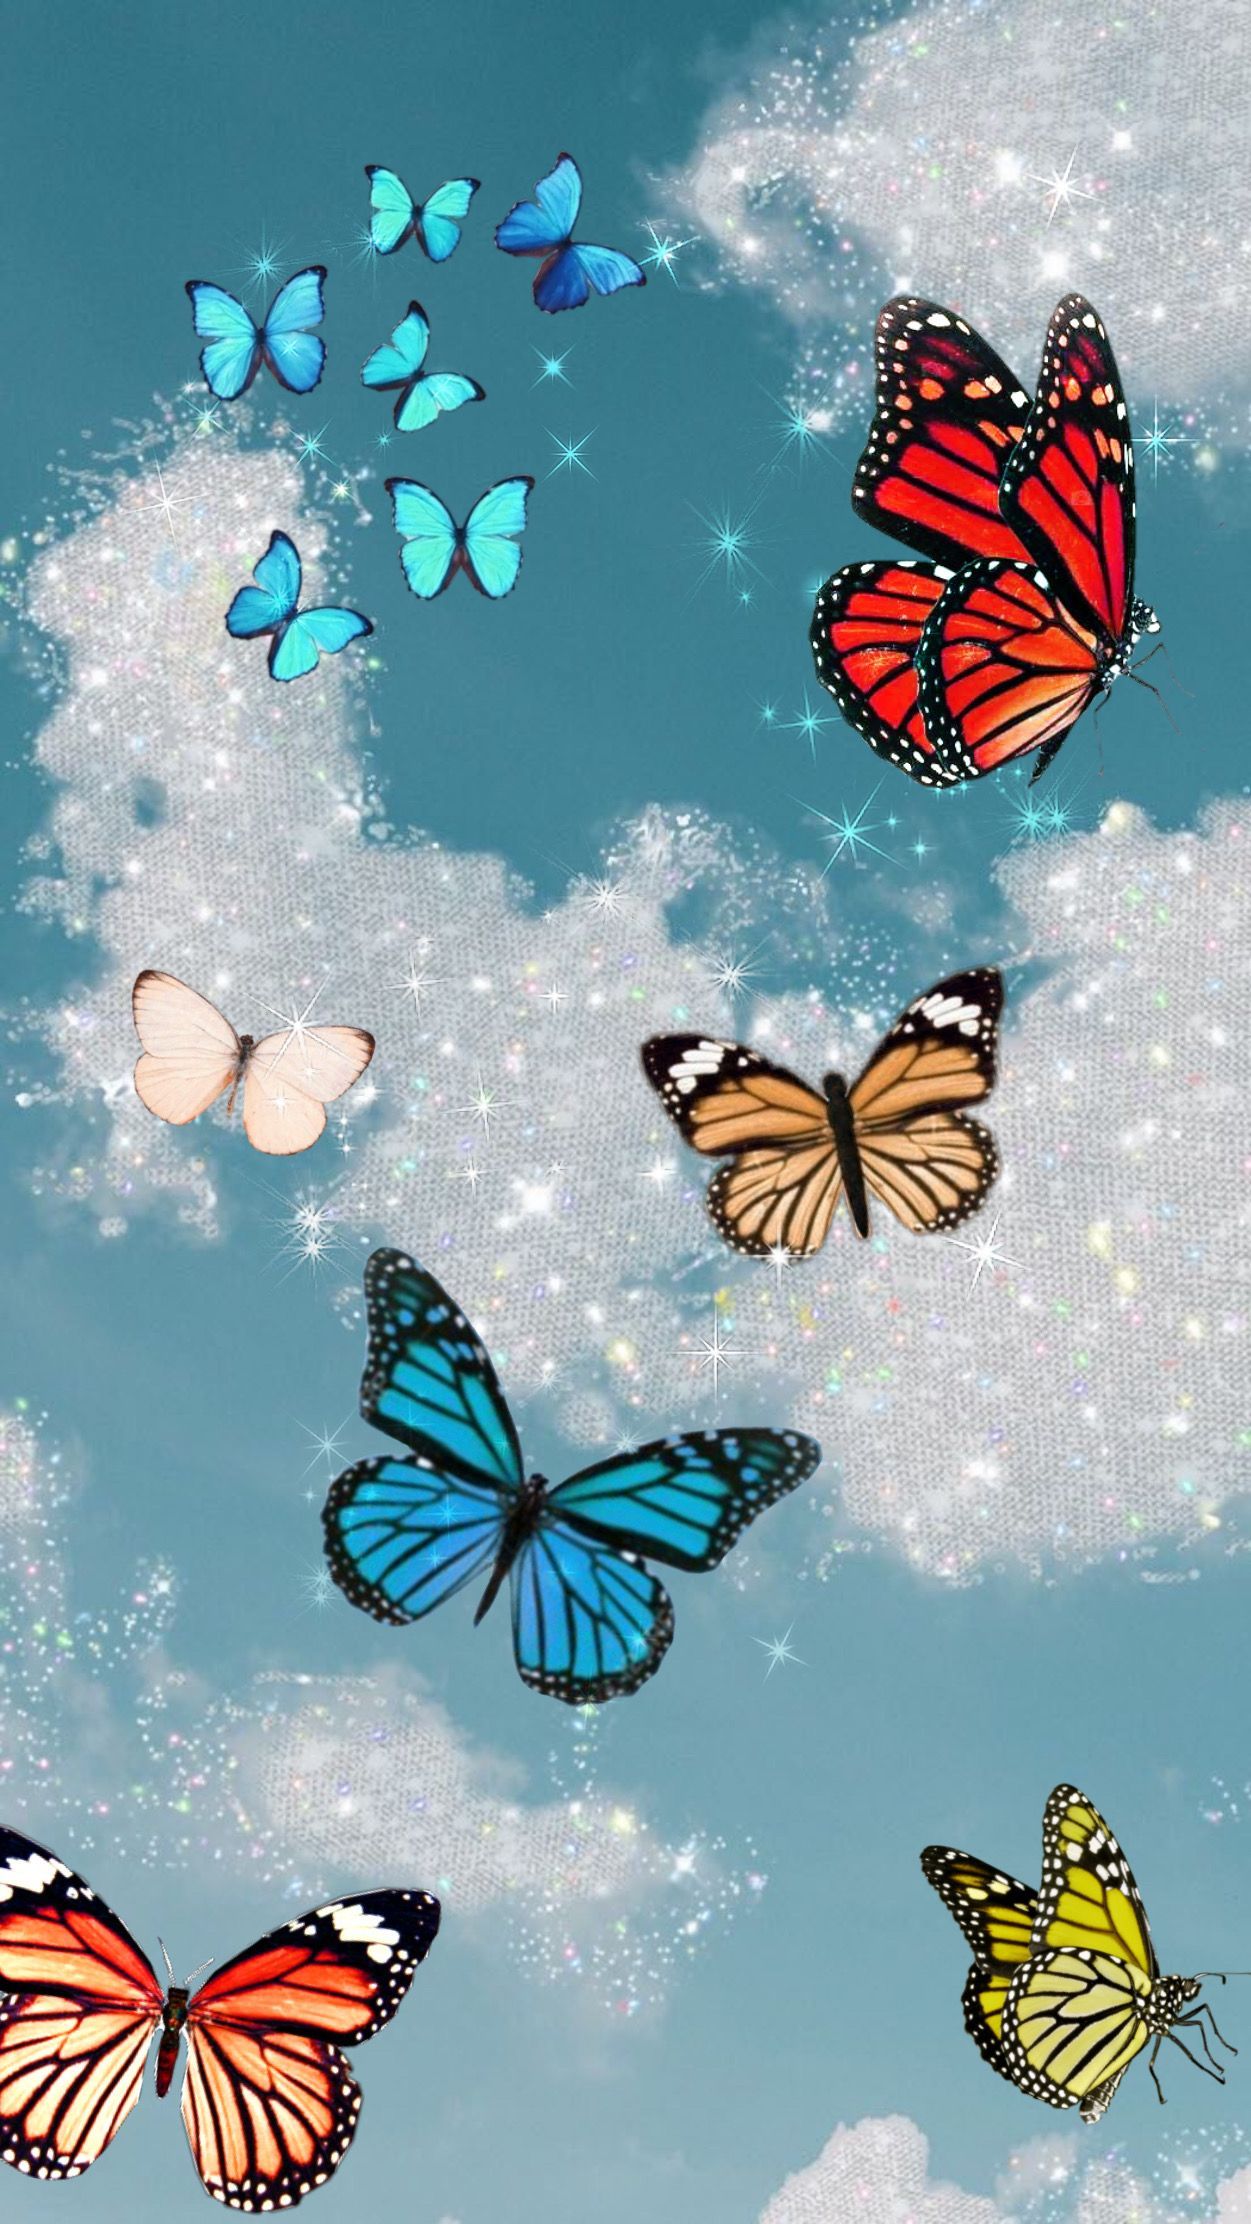 Autumn Aesthetic Butterfly Wallpapers - Wallpaper Cave